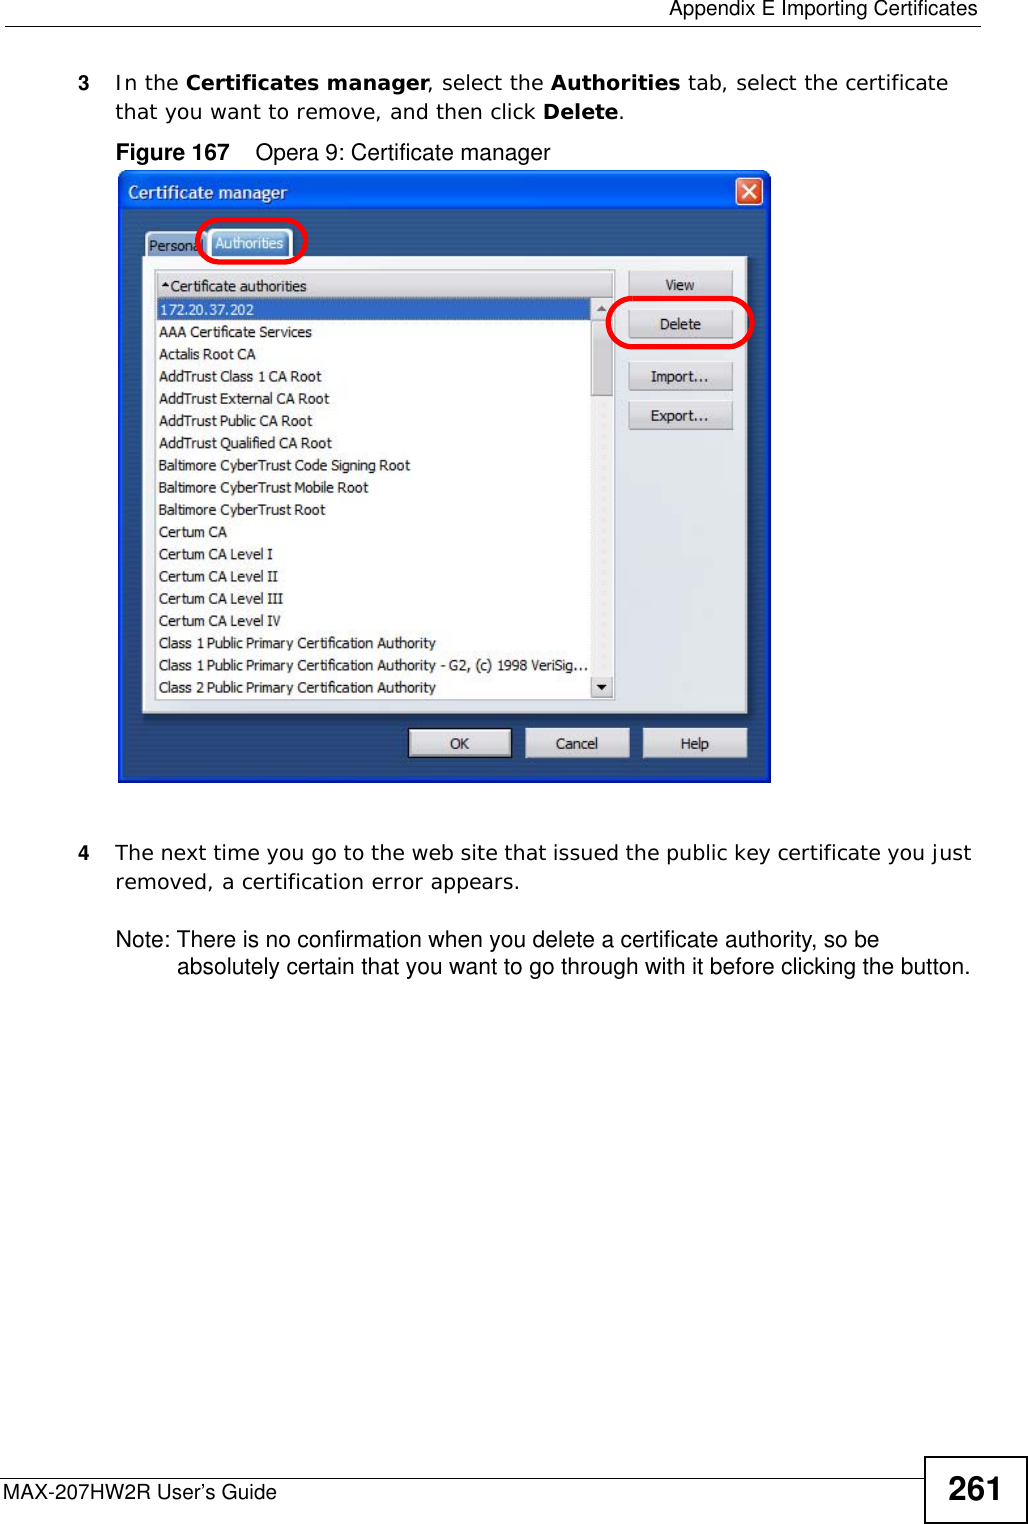  Appendix E Importing CertificatesMAX-207HW2R User’s Guide 2613In the Certificates manager, select the Authorities tab, select the certificate that you want to remove, and then click Delete.Figure 167    Opera 9: Certificate manager4The next time you go to the web site that issued the public key certificate you just removed, a certification error appears.Note: There is no confirmation when you delete a certificate authority, so be absolutely certain that you want to go through with it before clicking the button.